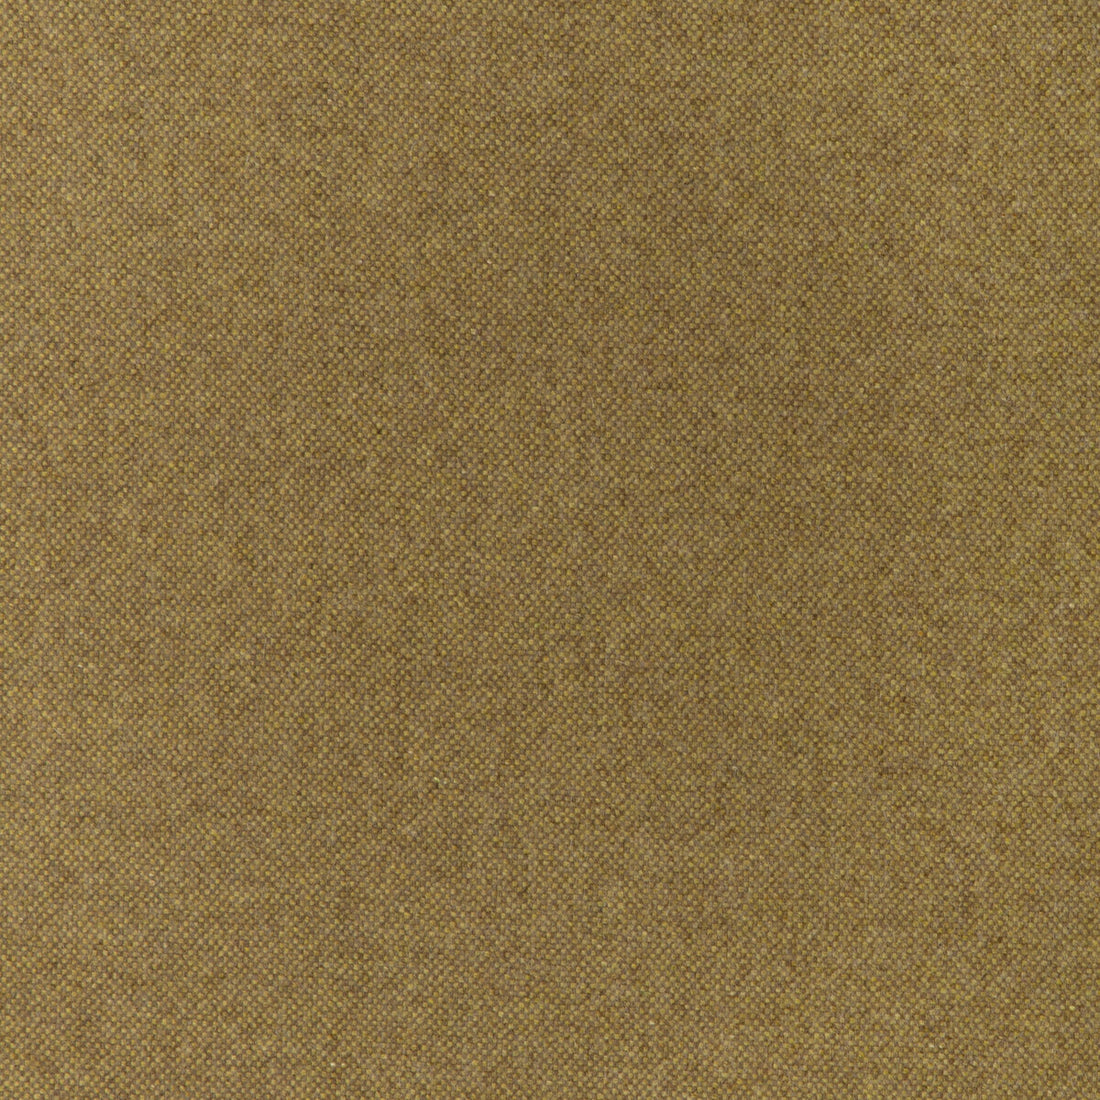 Manchester Wool fabric in marigold color - pattern 37026.640.0 - by Kravet Contract